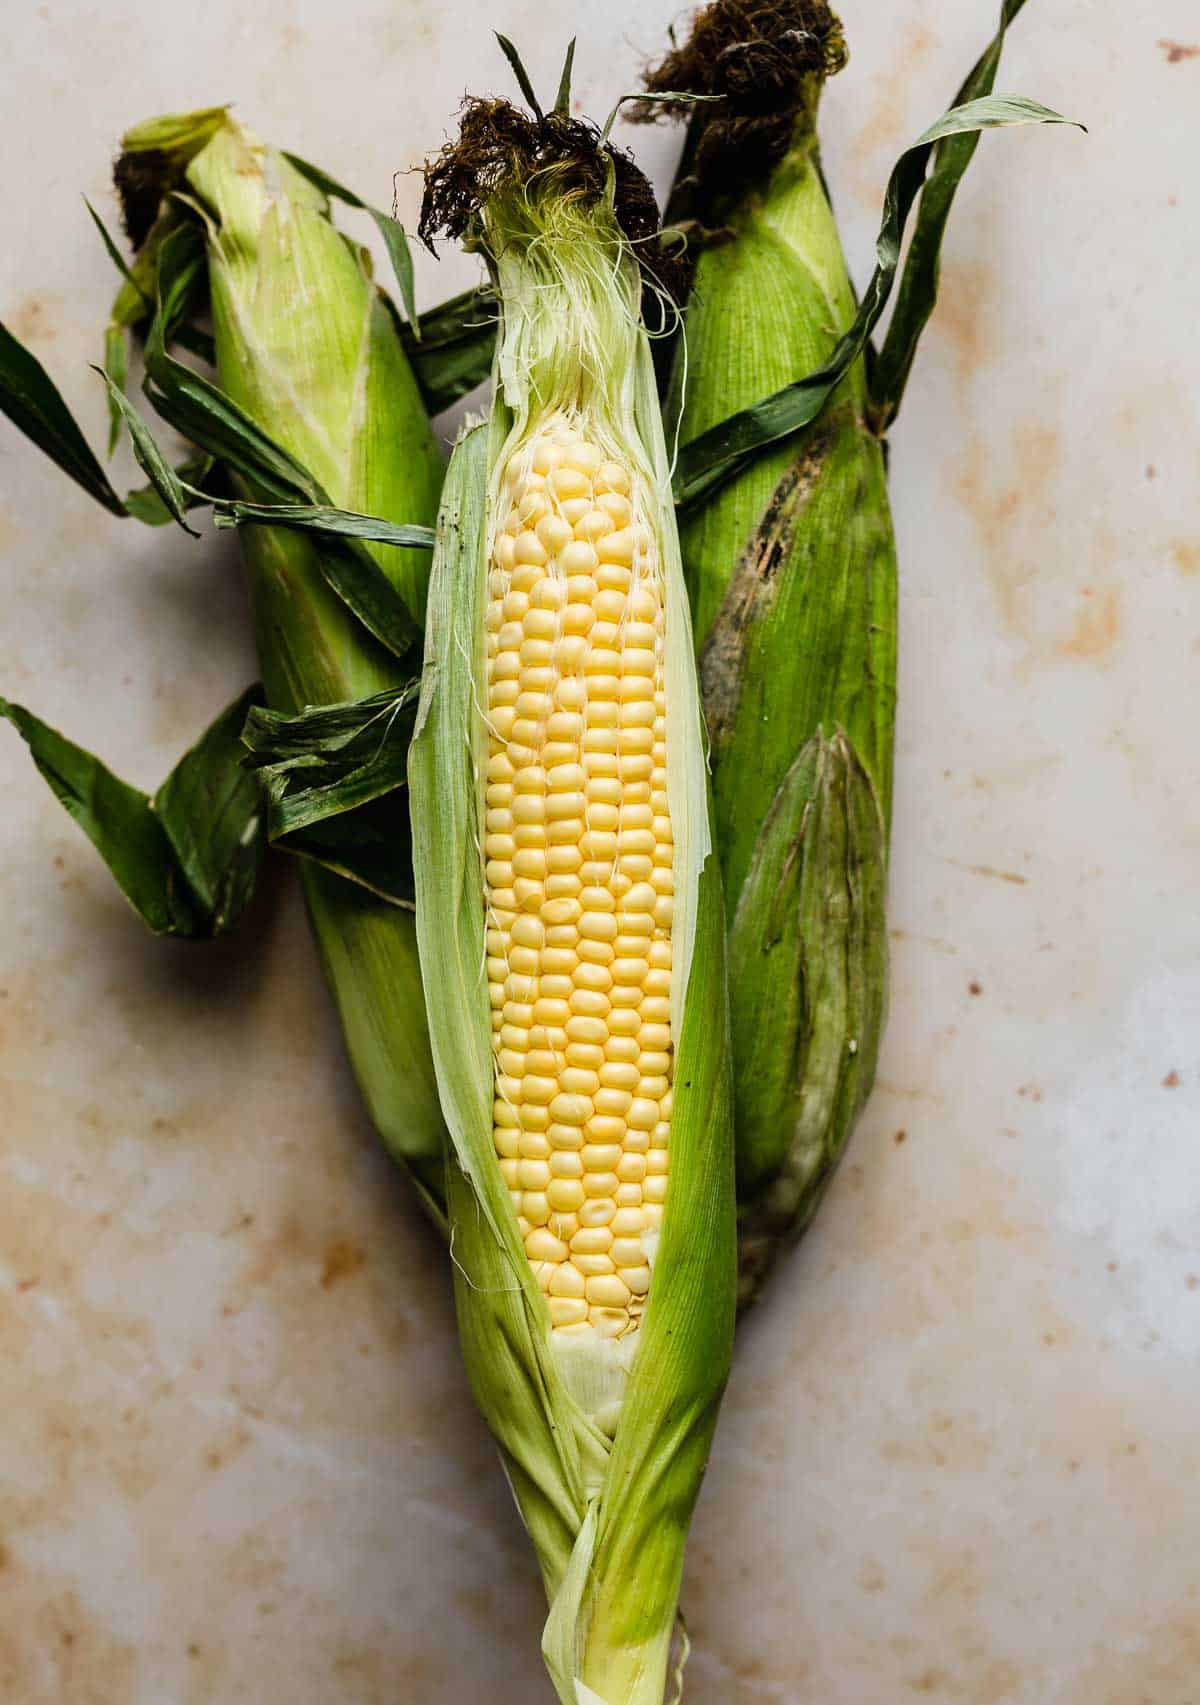 A single corn on the cob with the husks still on it, minus the front strip which has been removed to expose the yellow corn inside.